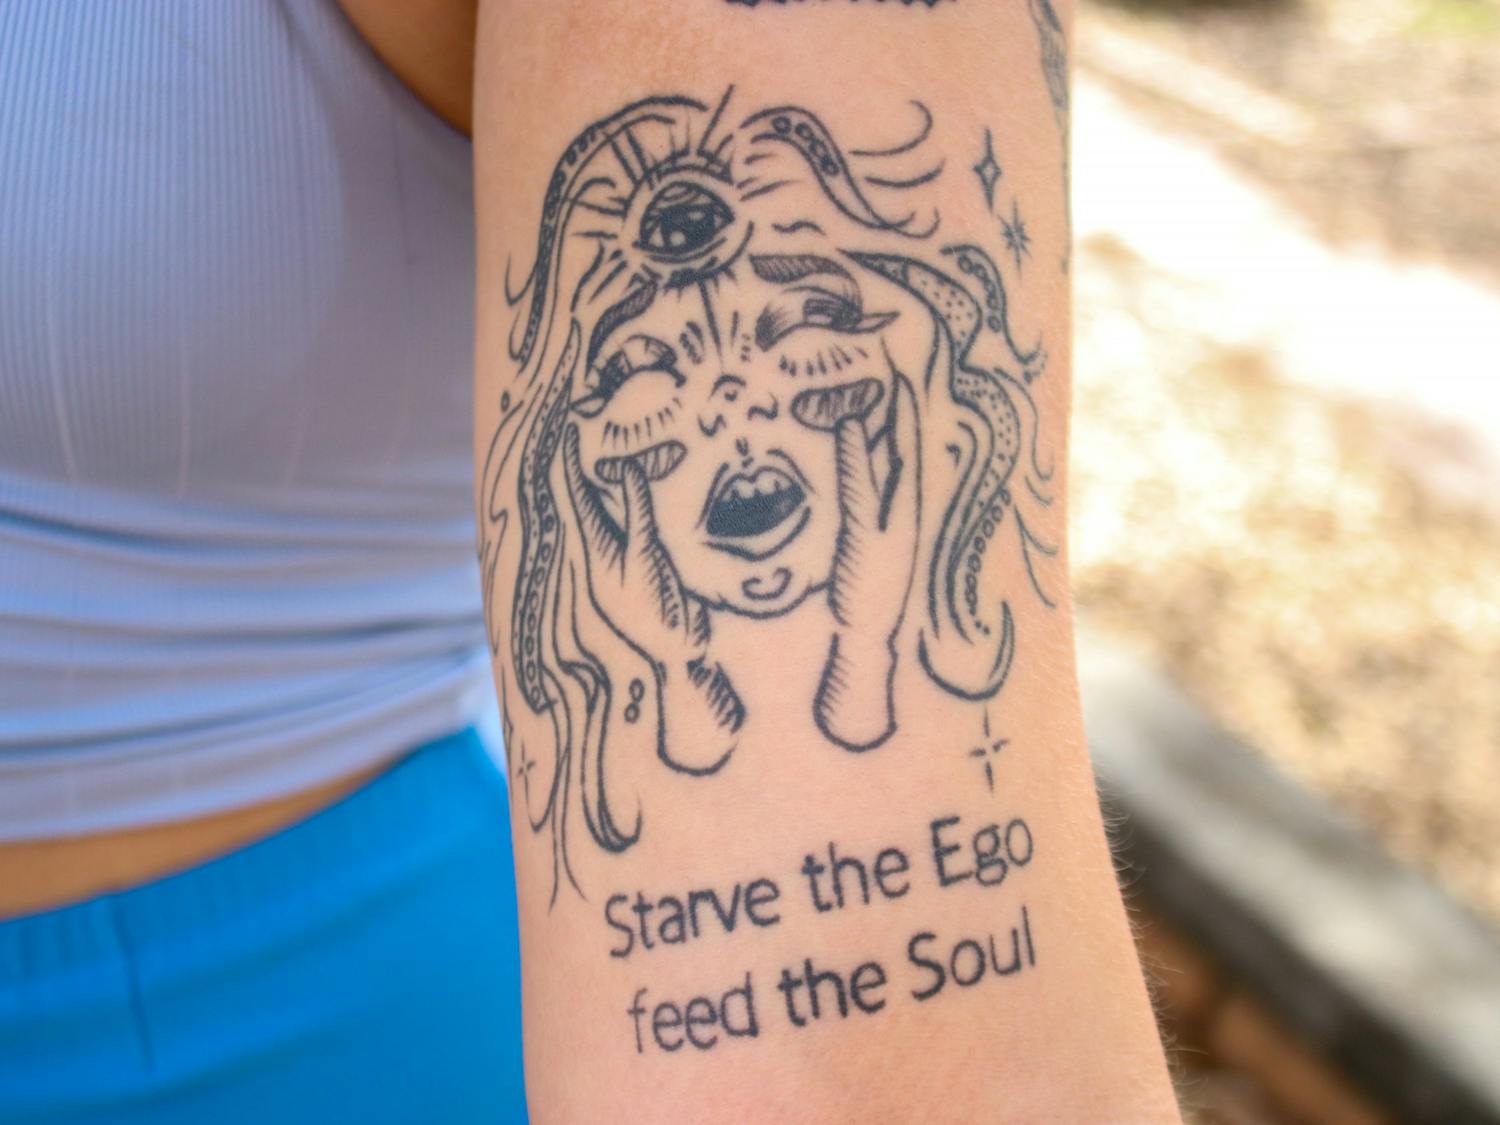 Sandford refers to this tattoo as “my girl.” “I look at this, and I feel it in my bones,” Sandford said. She noted the importance of the script beneath the face, reading “Starve the Ego, feed the Soul.” She said this phrase serves as a reminder to strip herself down and not put more ego into a world that has enough of it.